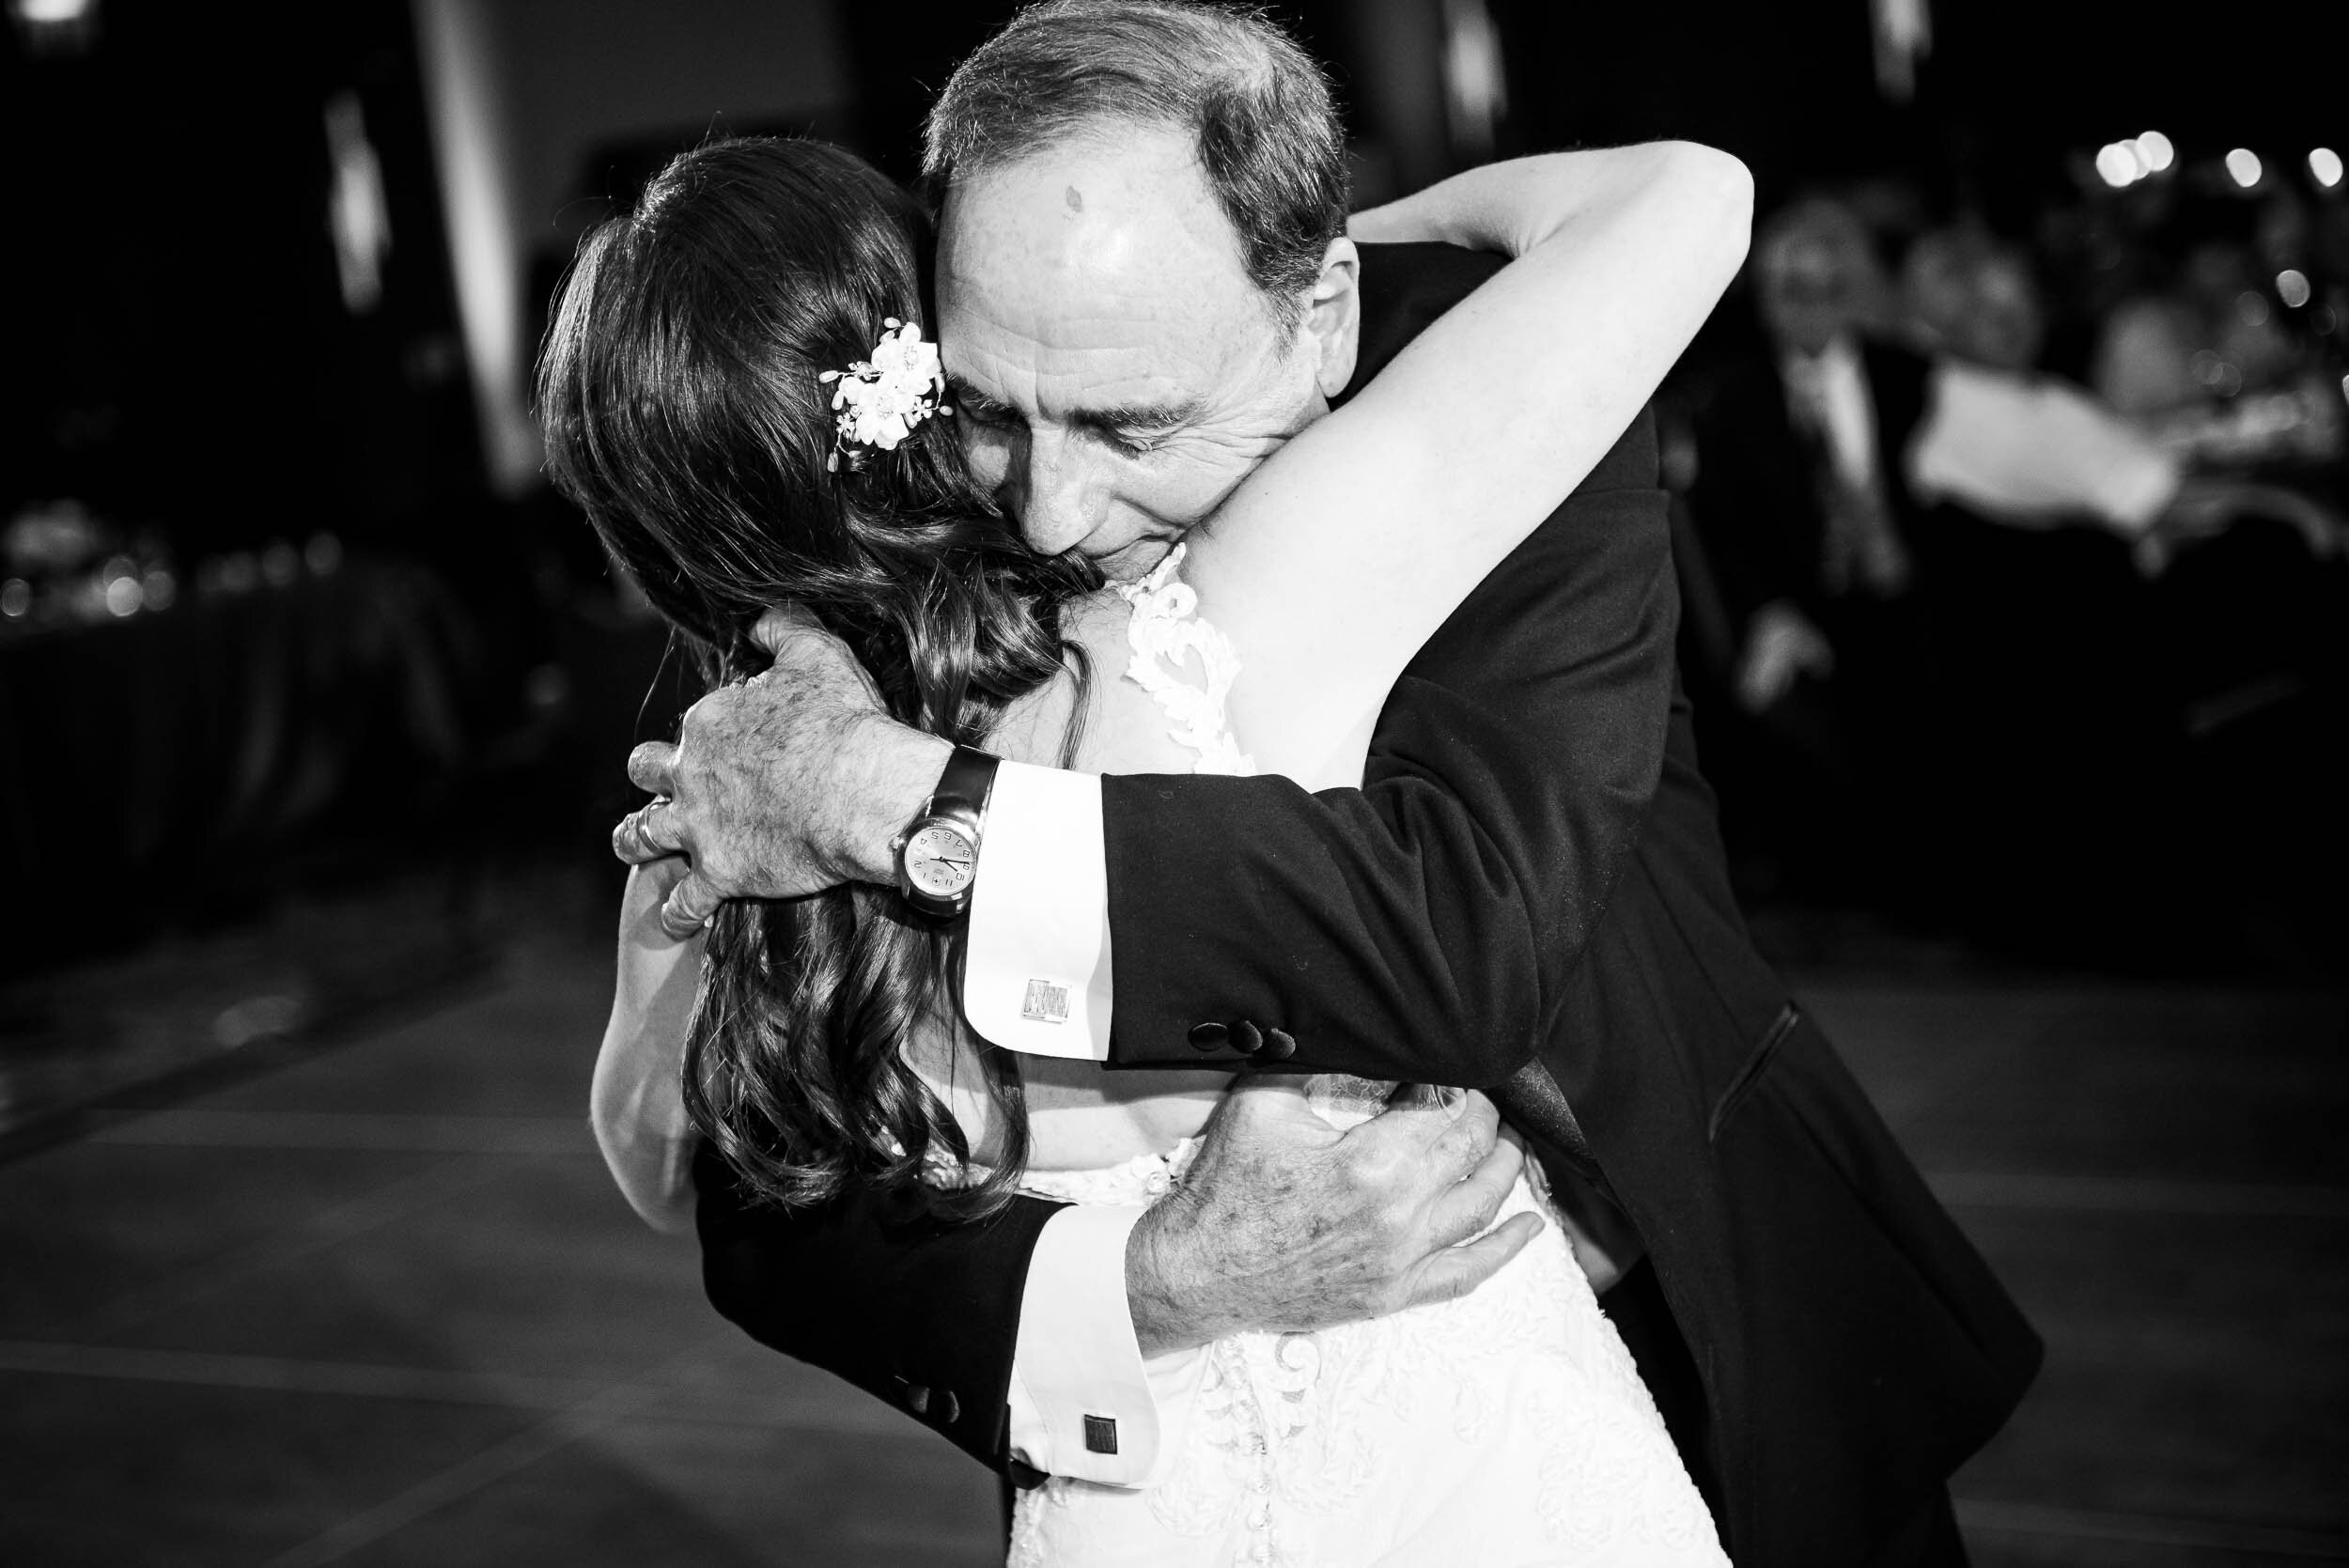 Father daughter dance photography: Loews Chicago Hotel Wedding captured by J. Brown Photography